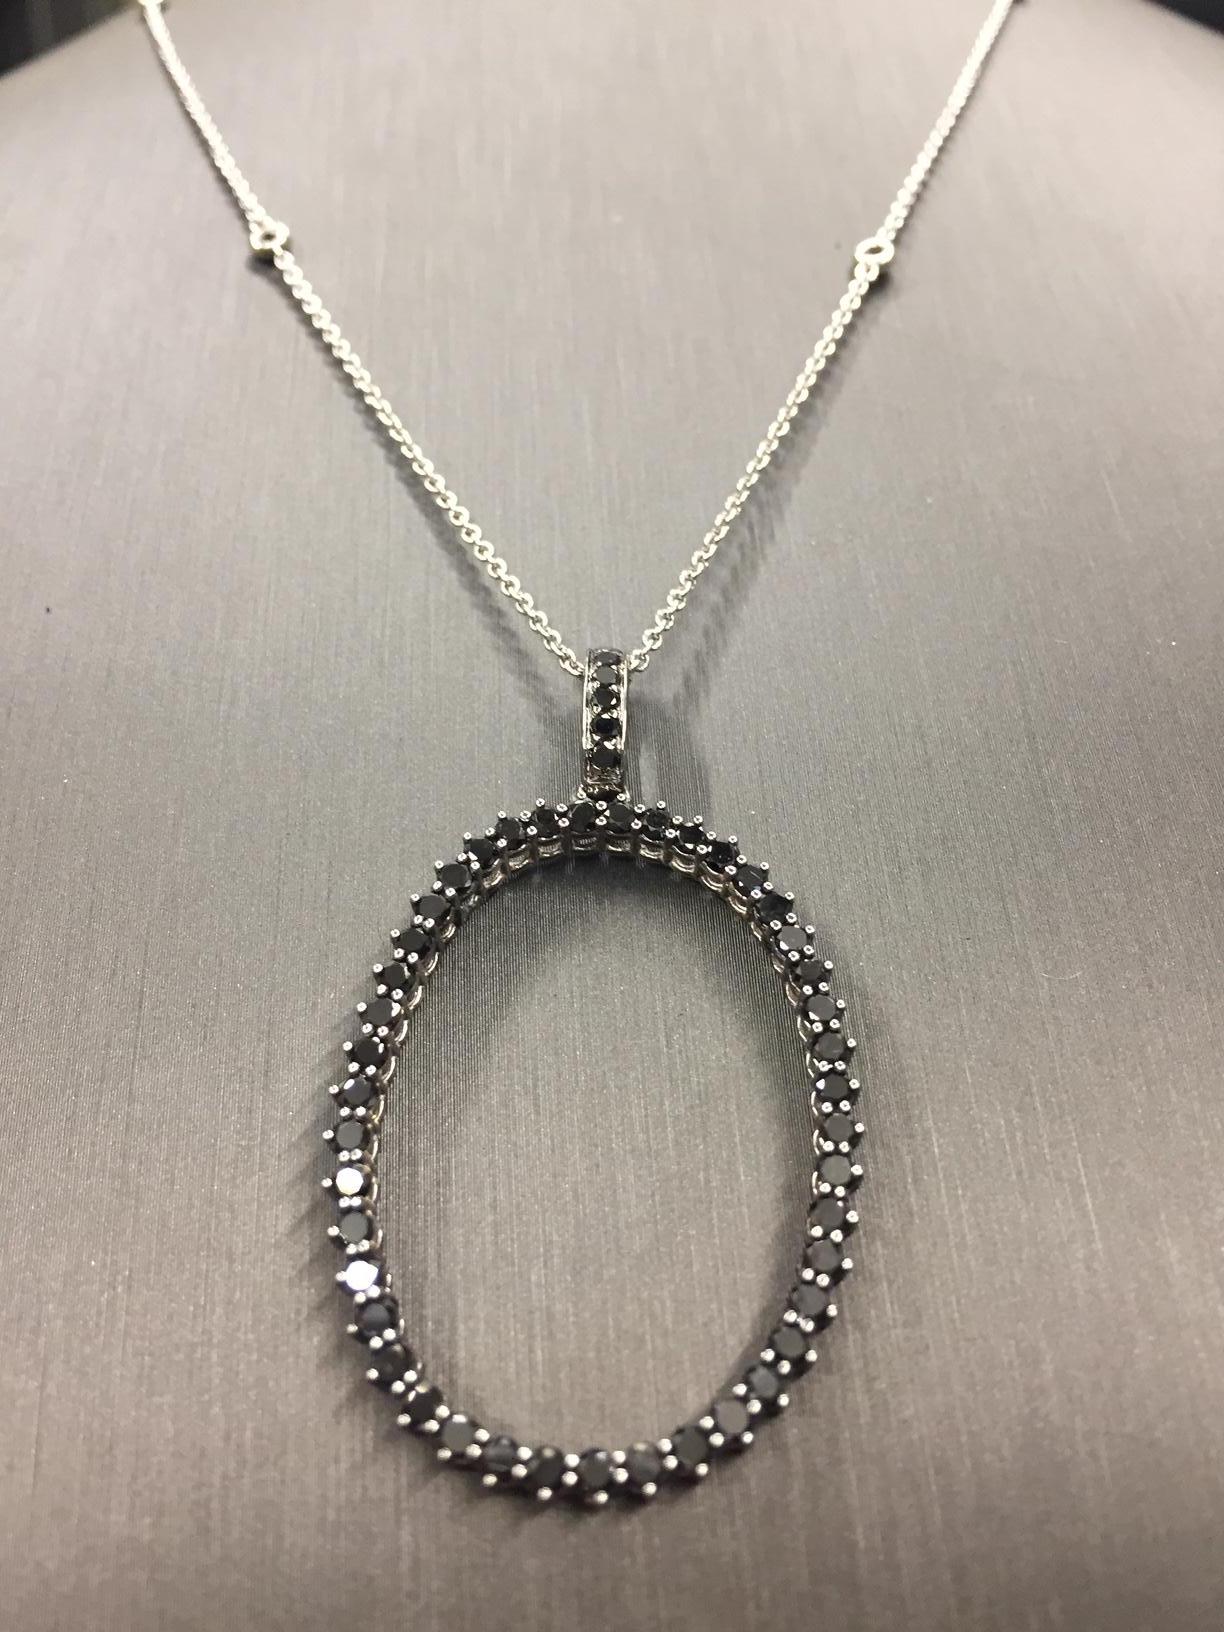 18 Karat White Gold Garavelli Necklace with Black Diamonds In New Condition For Sale In Valenza, IT